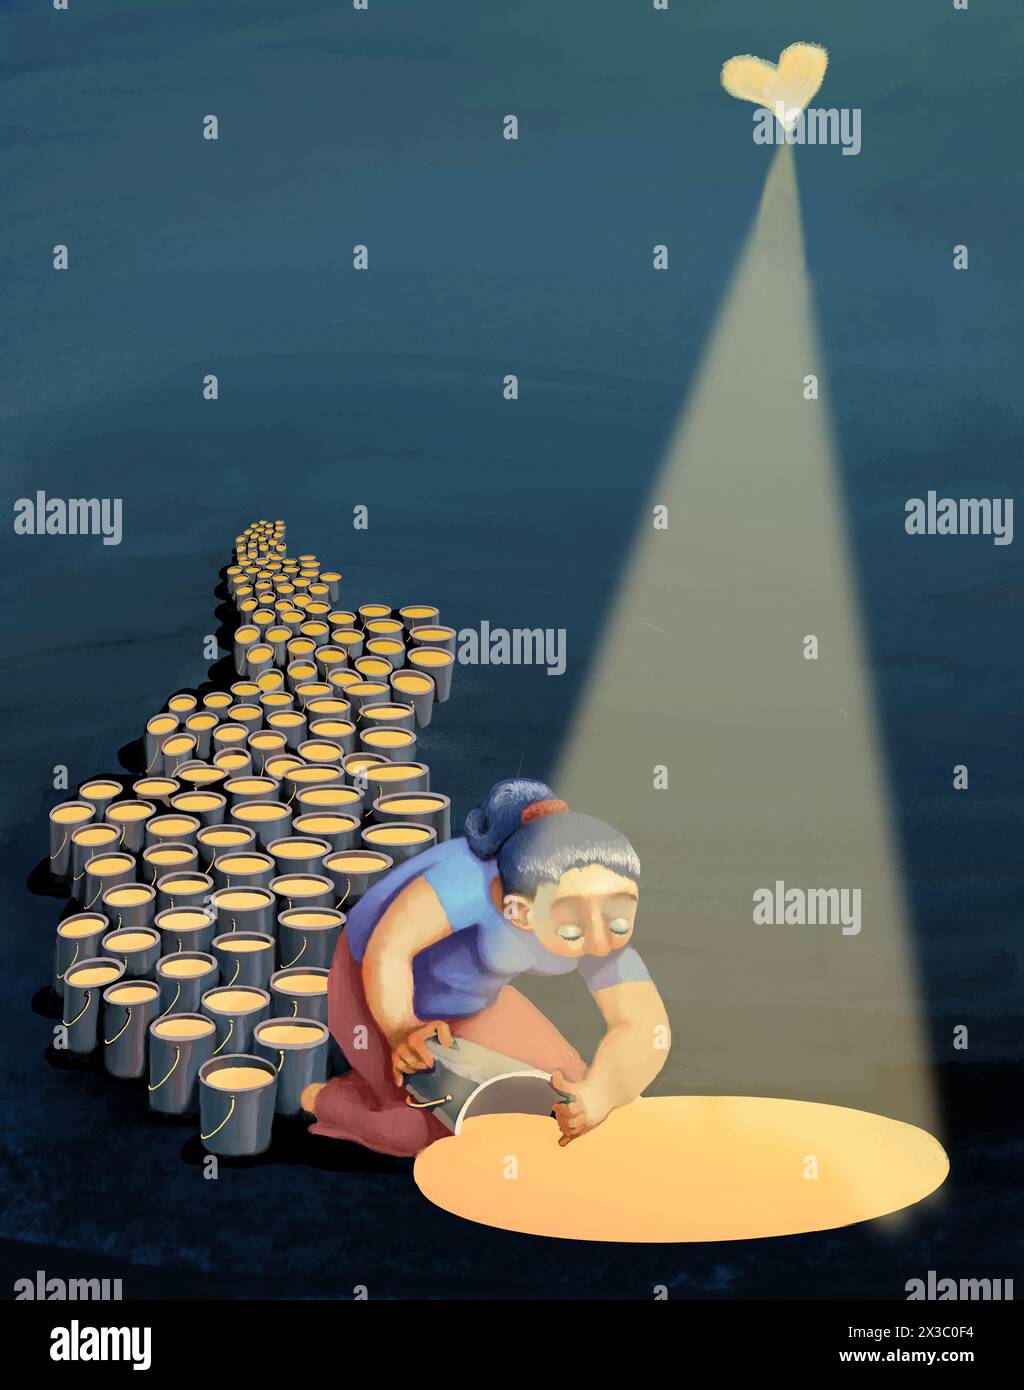 woman fills buckets with the light coming from a small golden heart in the night sky, concept of preserving moments and loving thoughts for the saddes Stock Photo